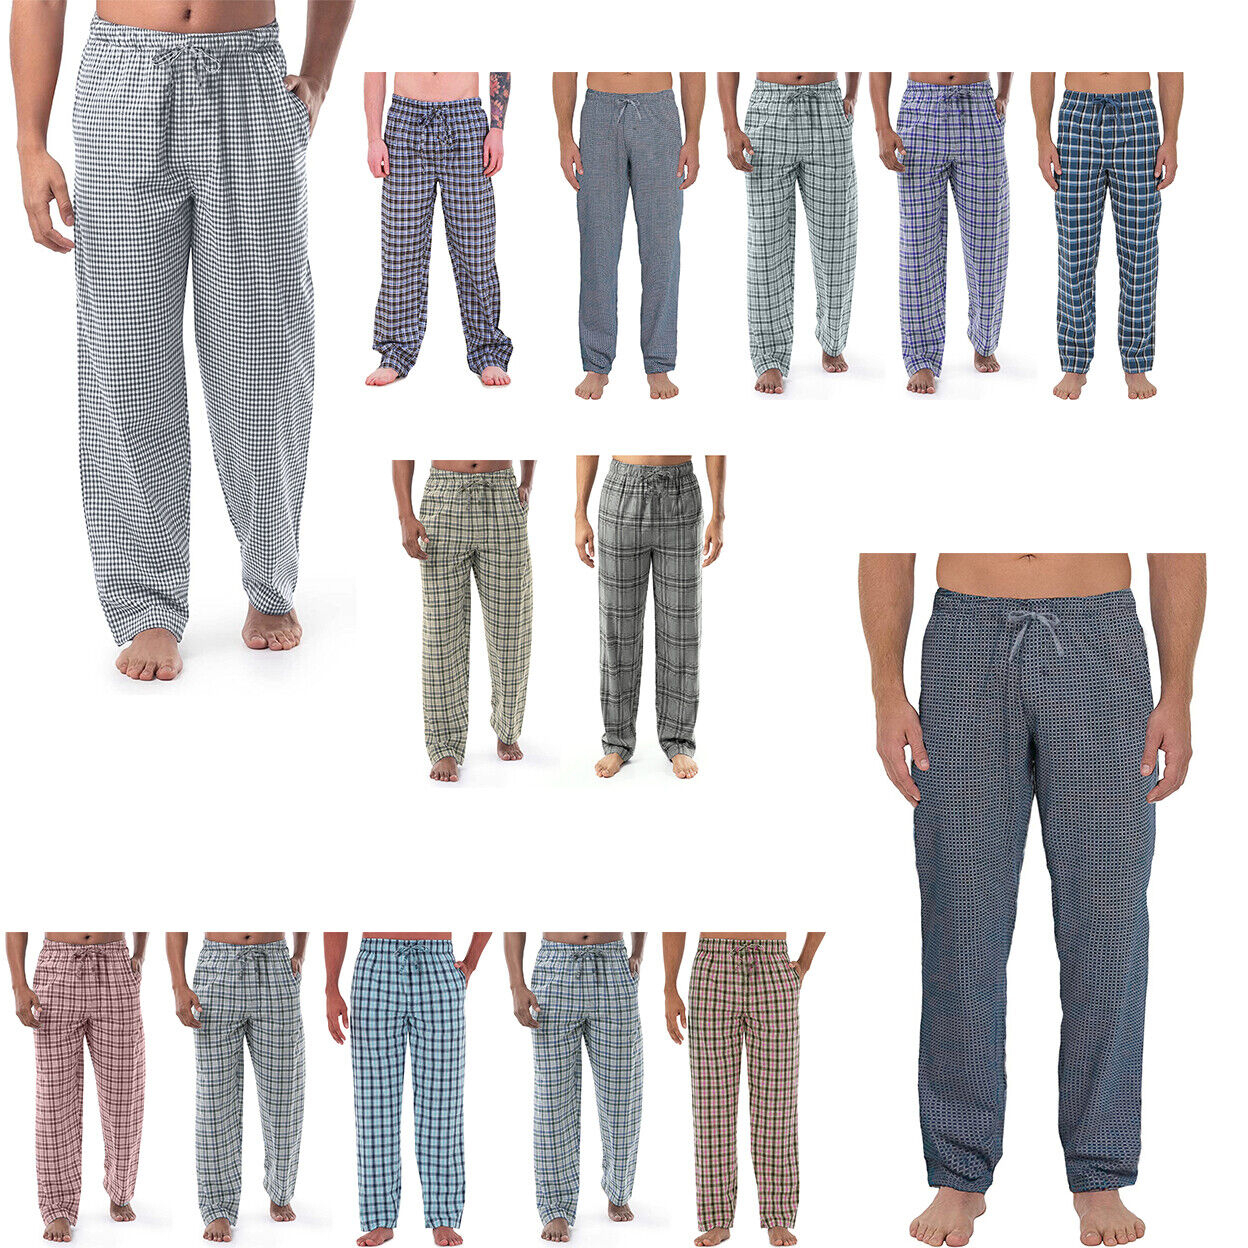 Multi-Pack: Men's Ultra-Soft Solid & Plaid Cotton Jersey Knit Comfy Sleep Lounge Pajama Pants - 3-pack Plaid, Xx-large